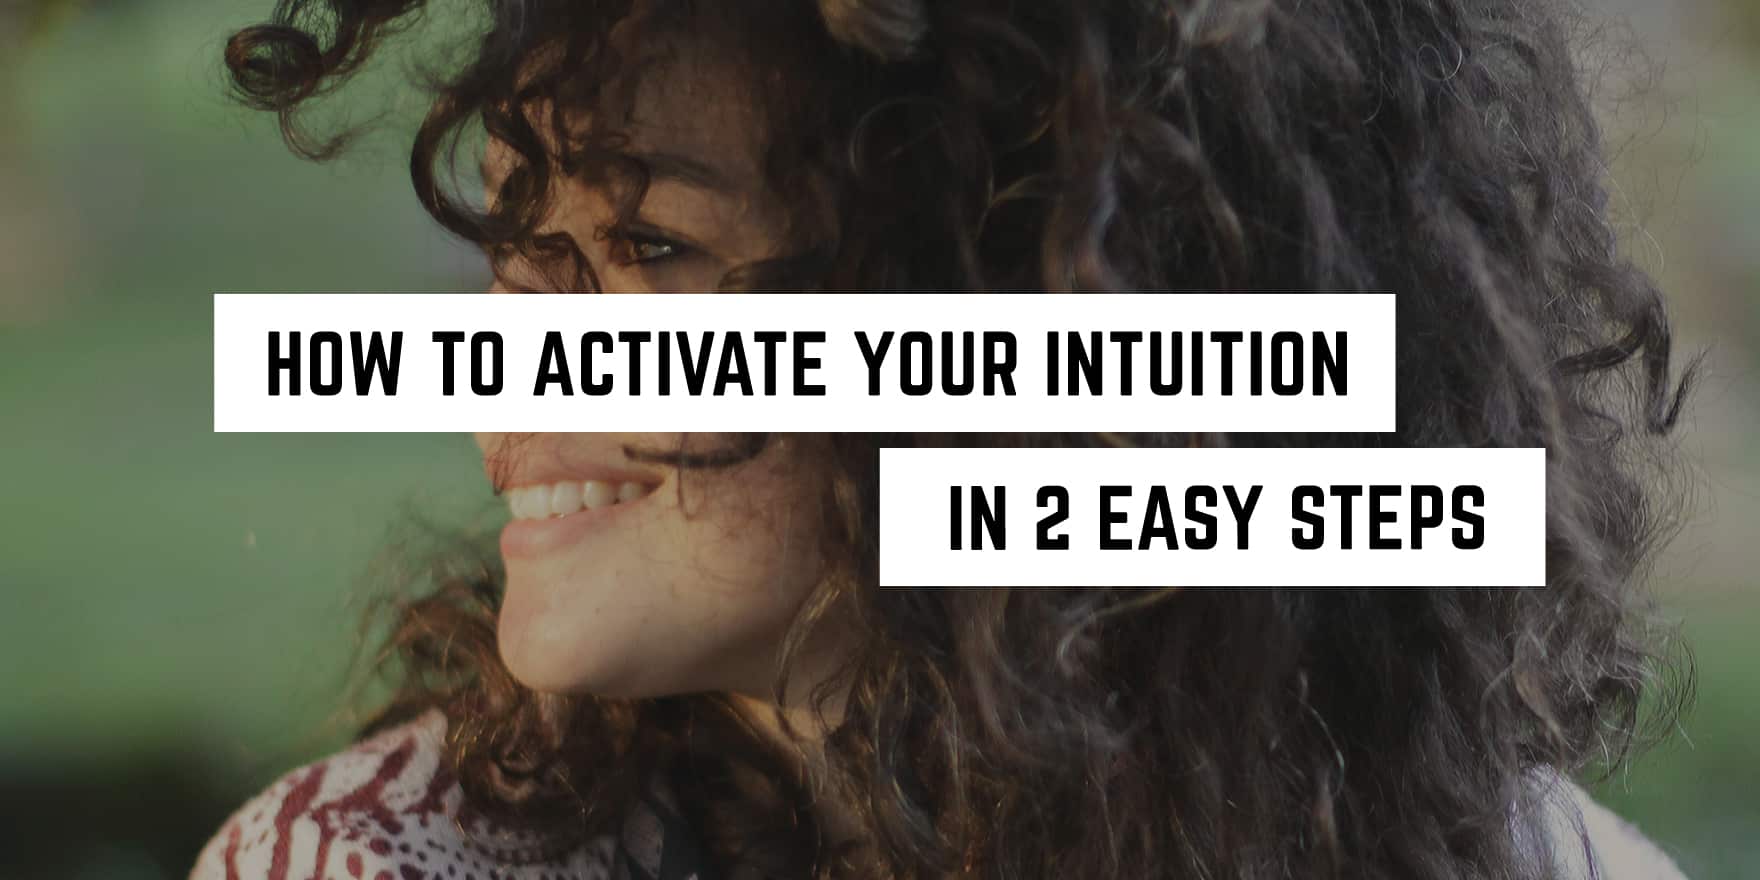 A smiling woman with curly hair partially obscuring her face next to text reading "how to activate your intuition in 2 easy steps," all set against a witchy backdrop.